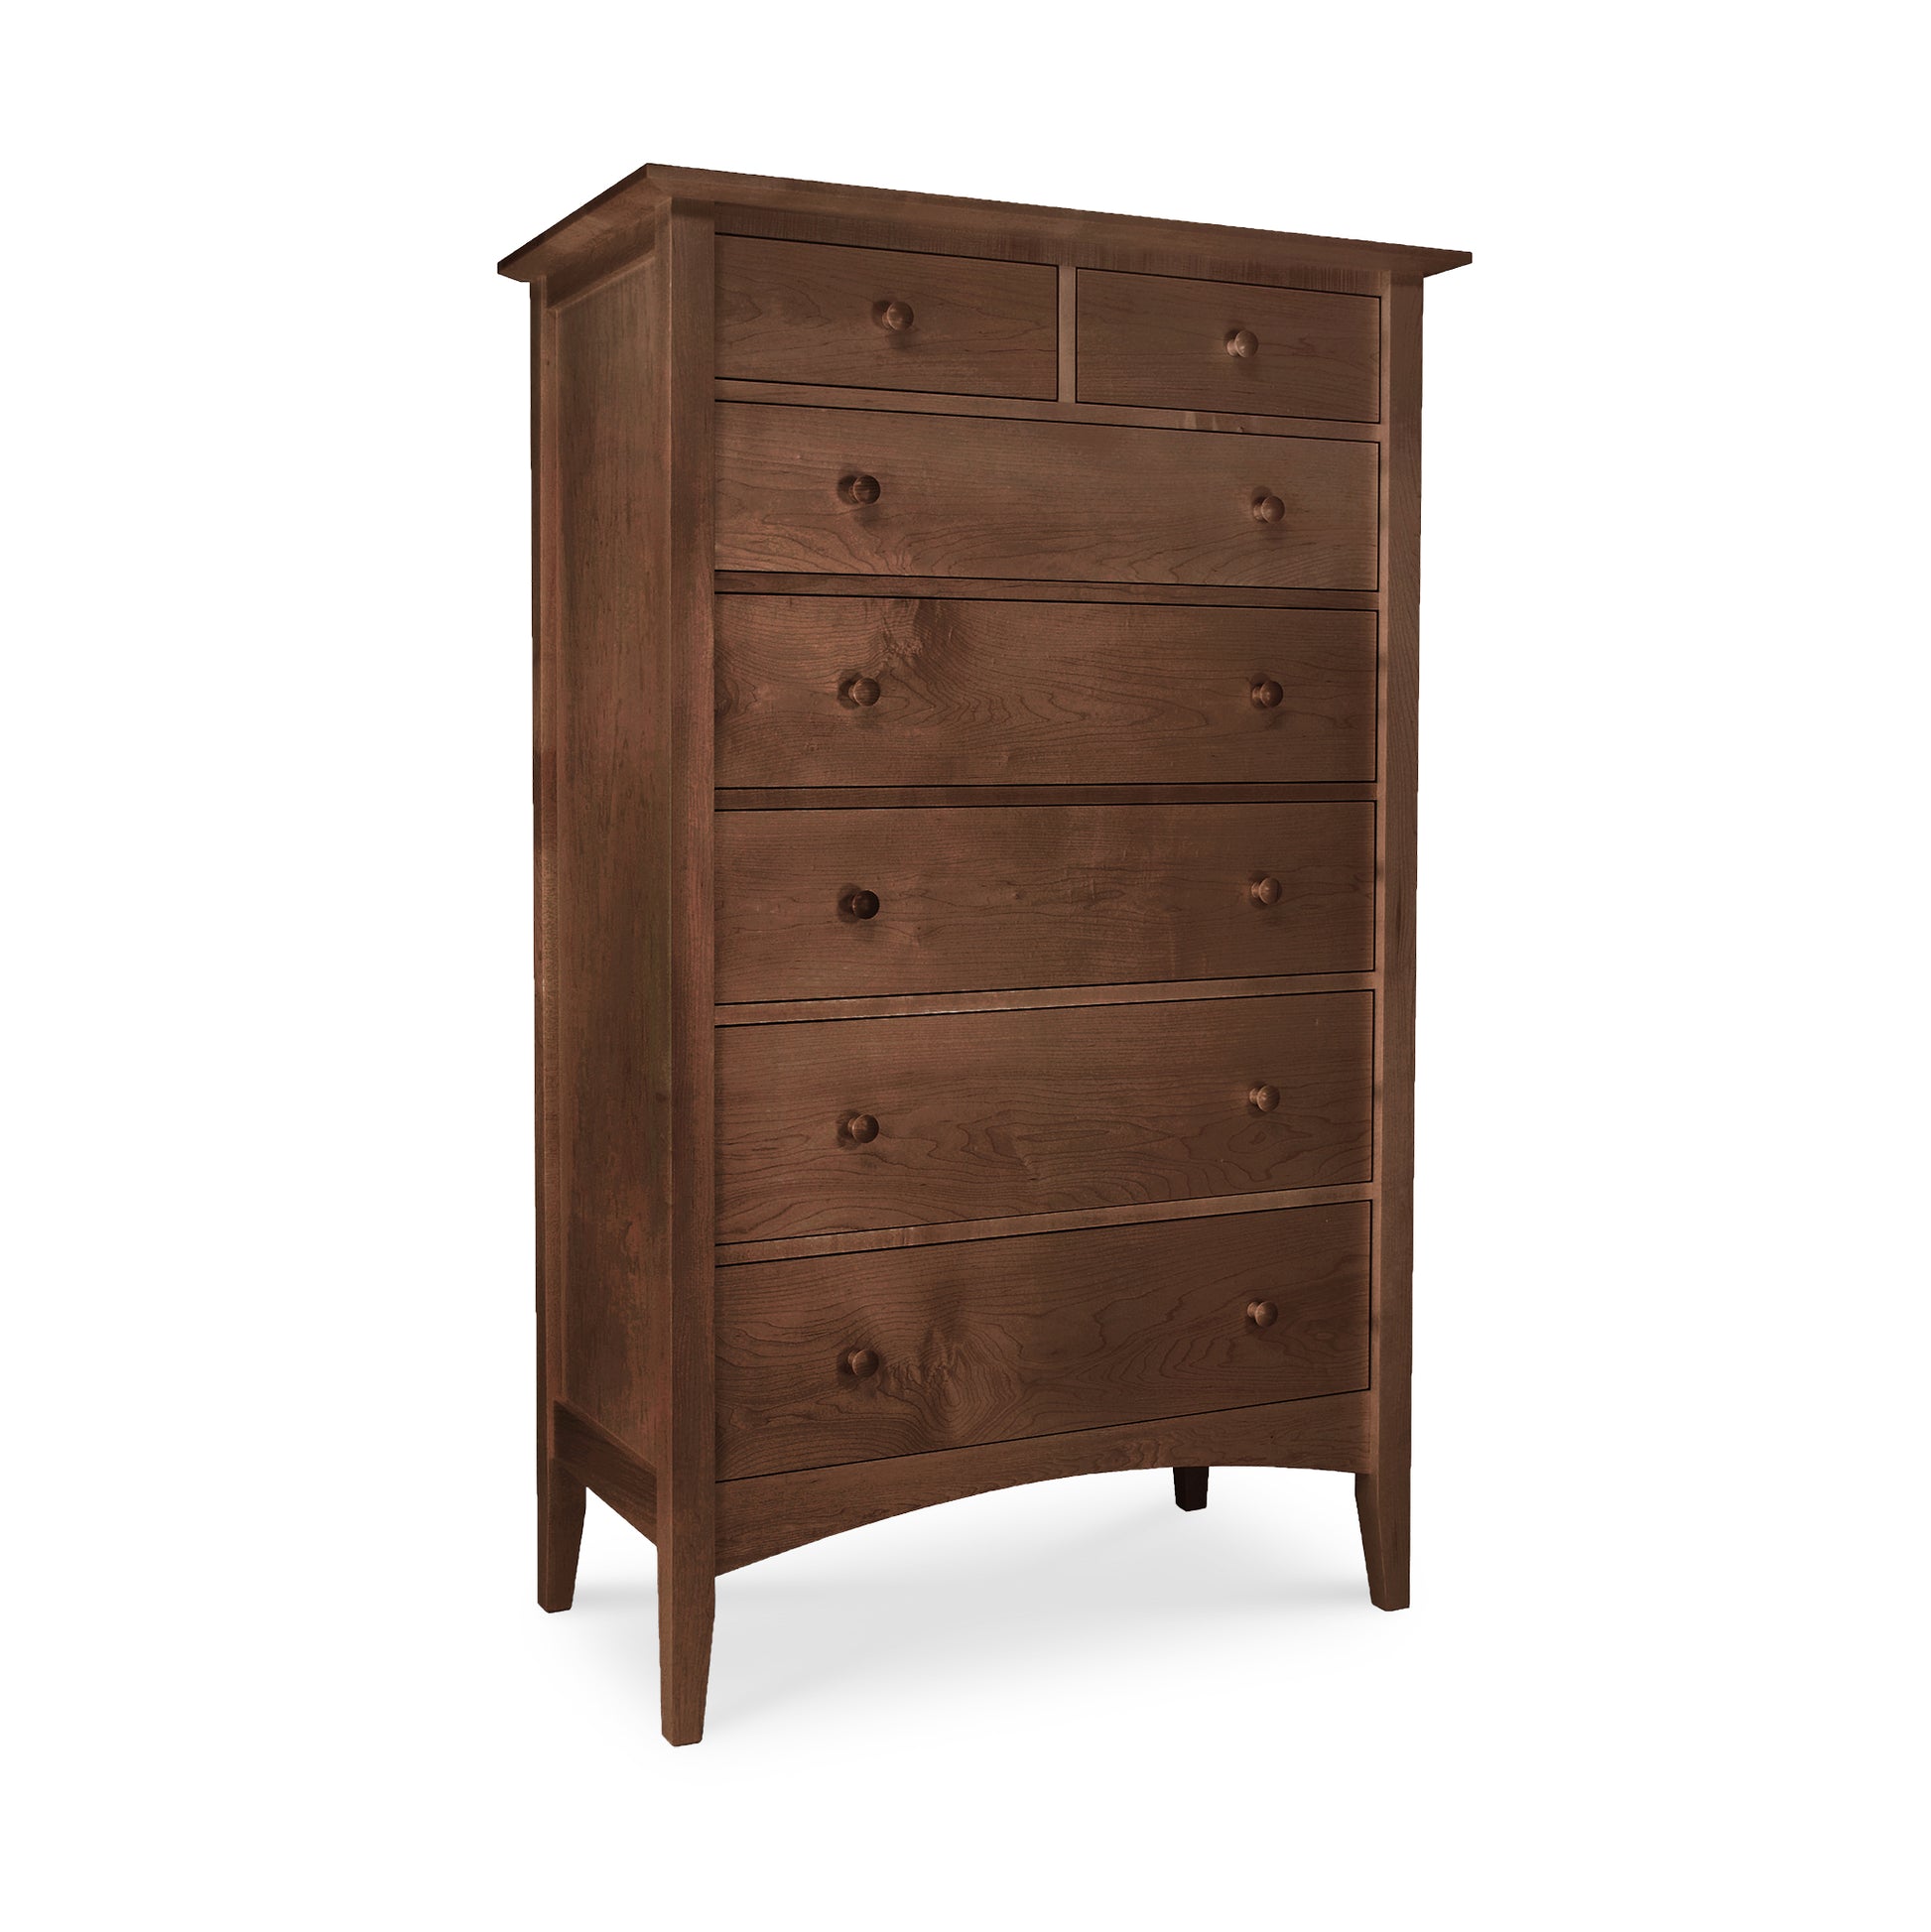 A wooden American Shaker 7-Drawer Chest from Maple Corner Woodworks standing against a white background.